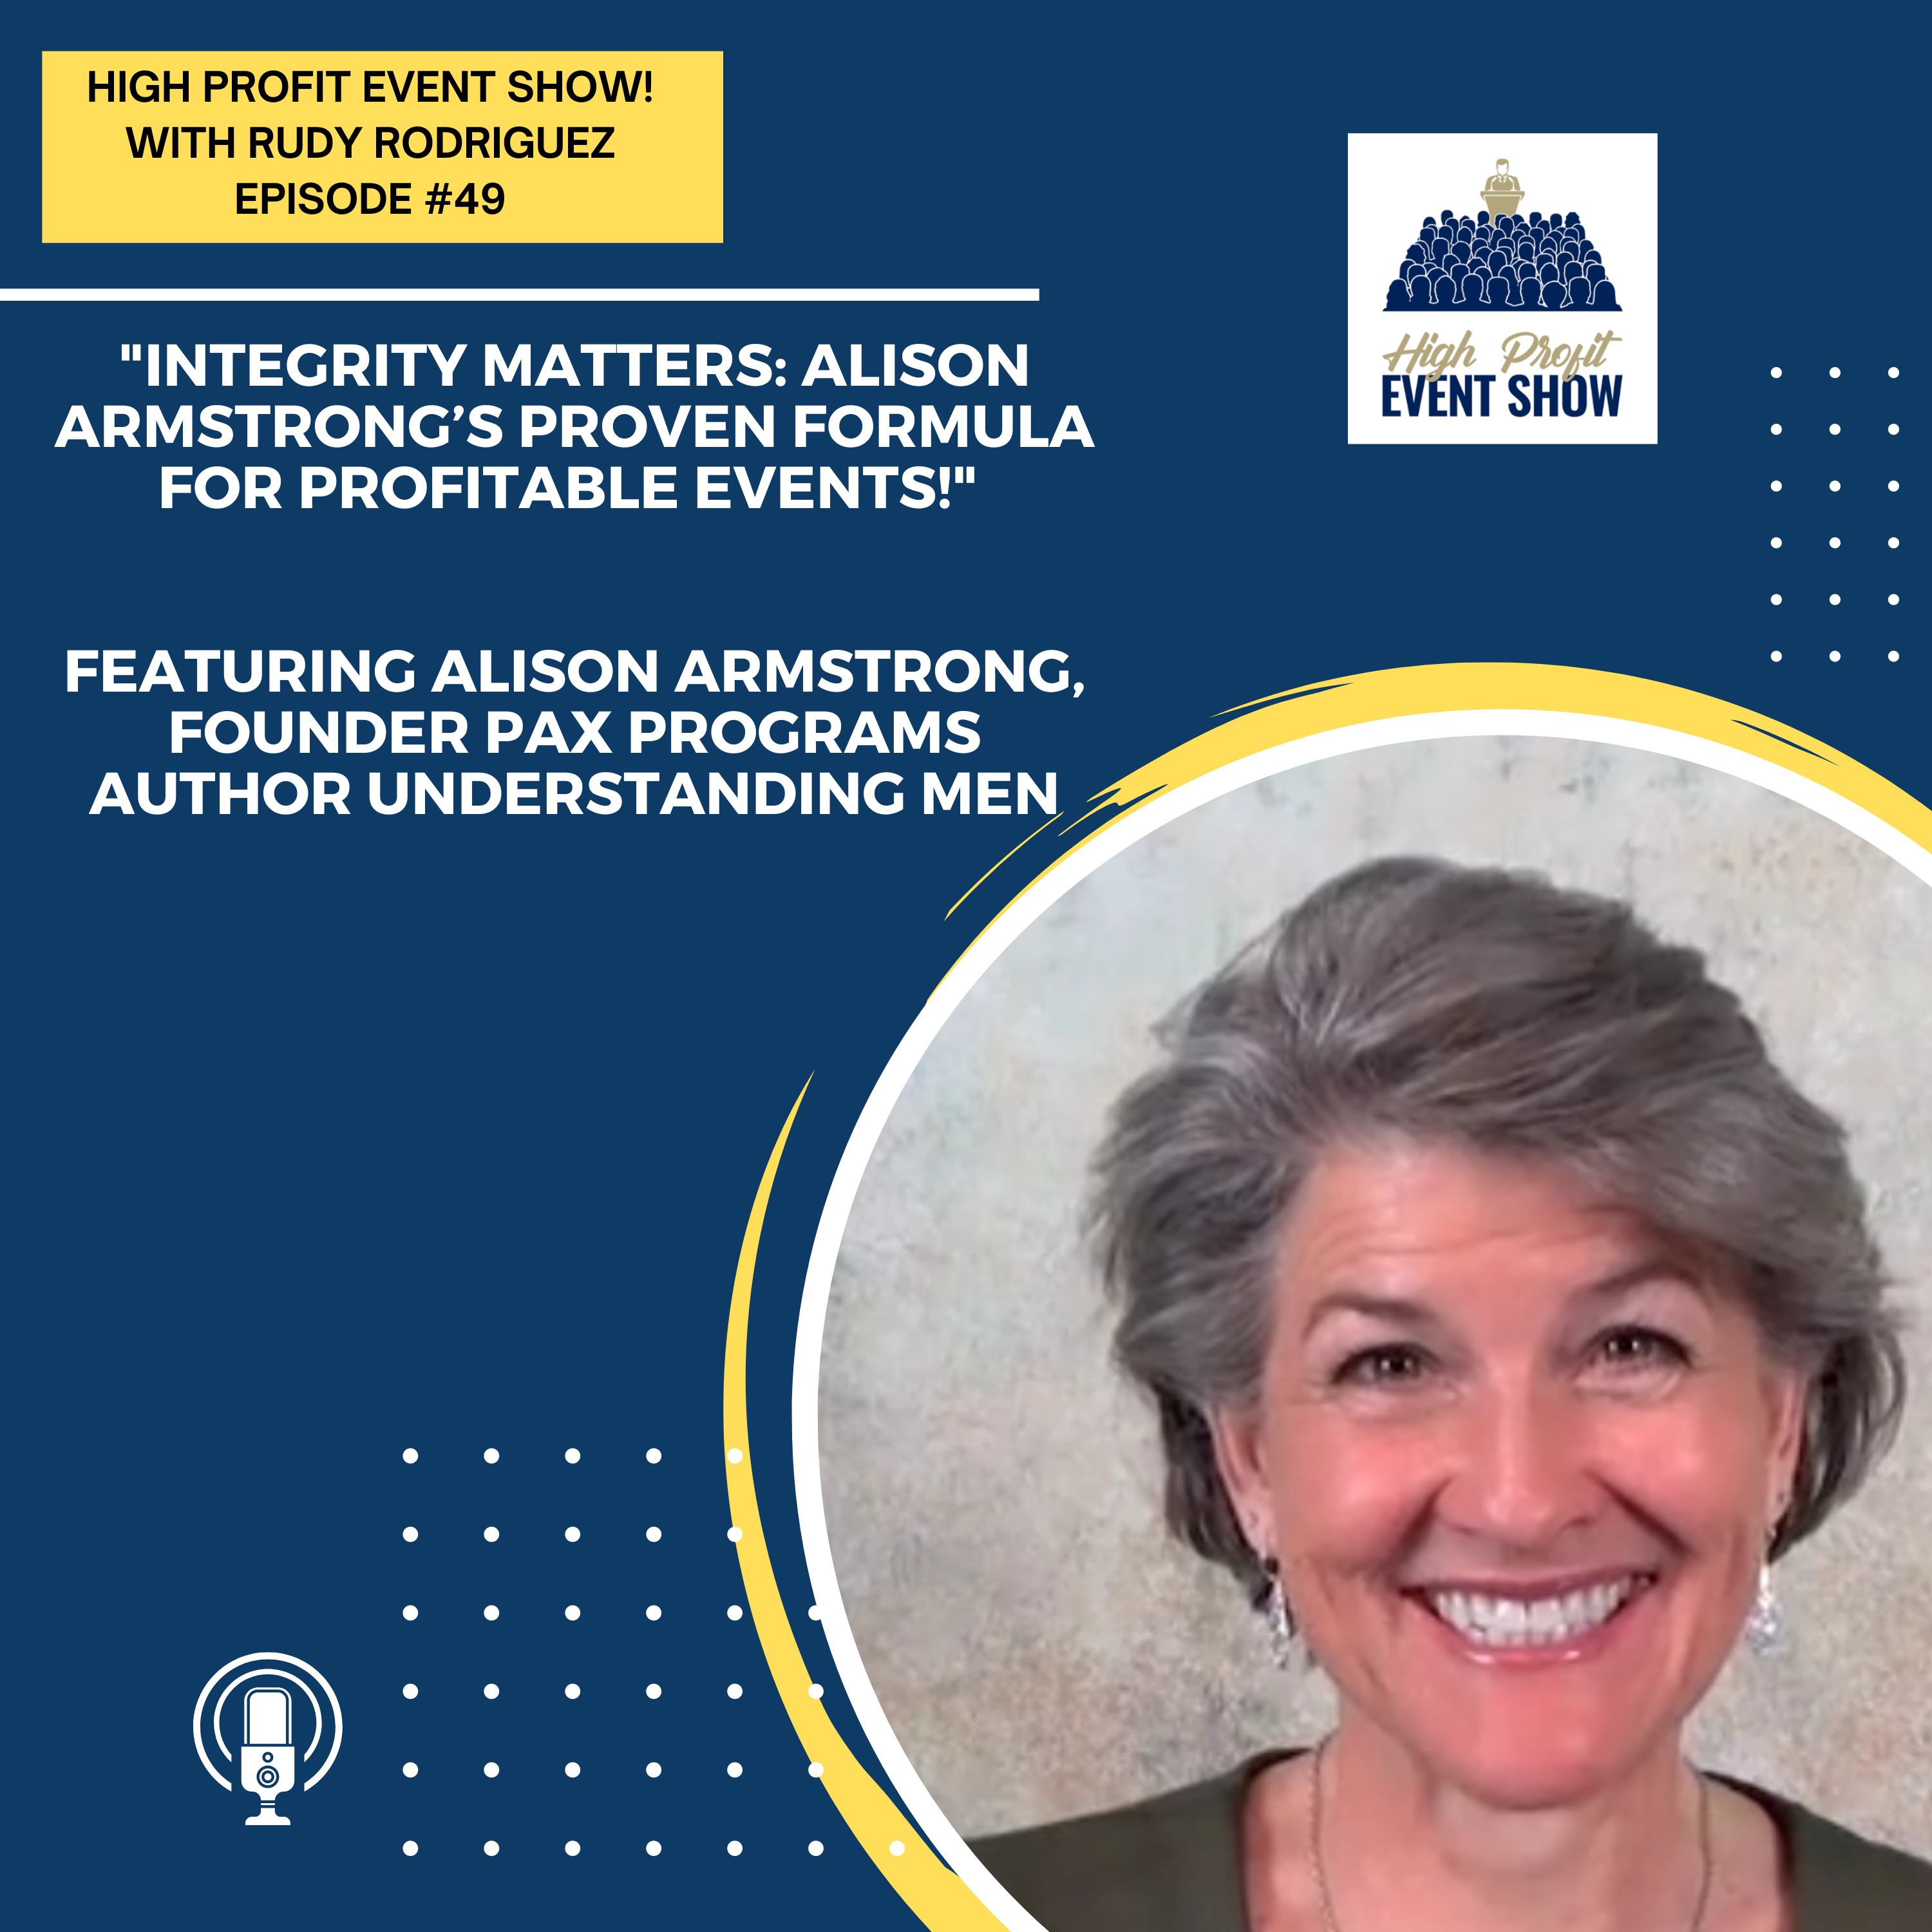 Episode 49: Integrity Matters: Alison Armstrong’s Proven Formula for Profitable Events!